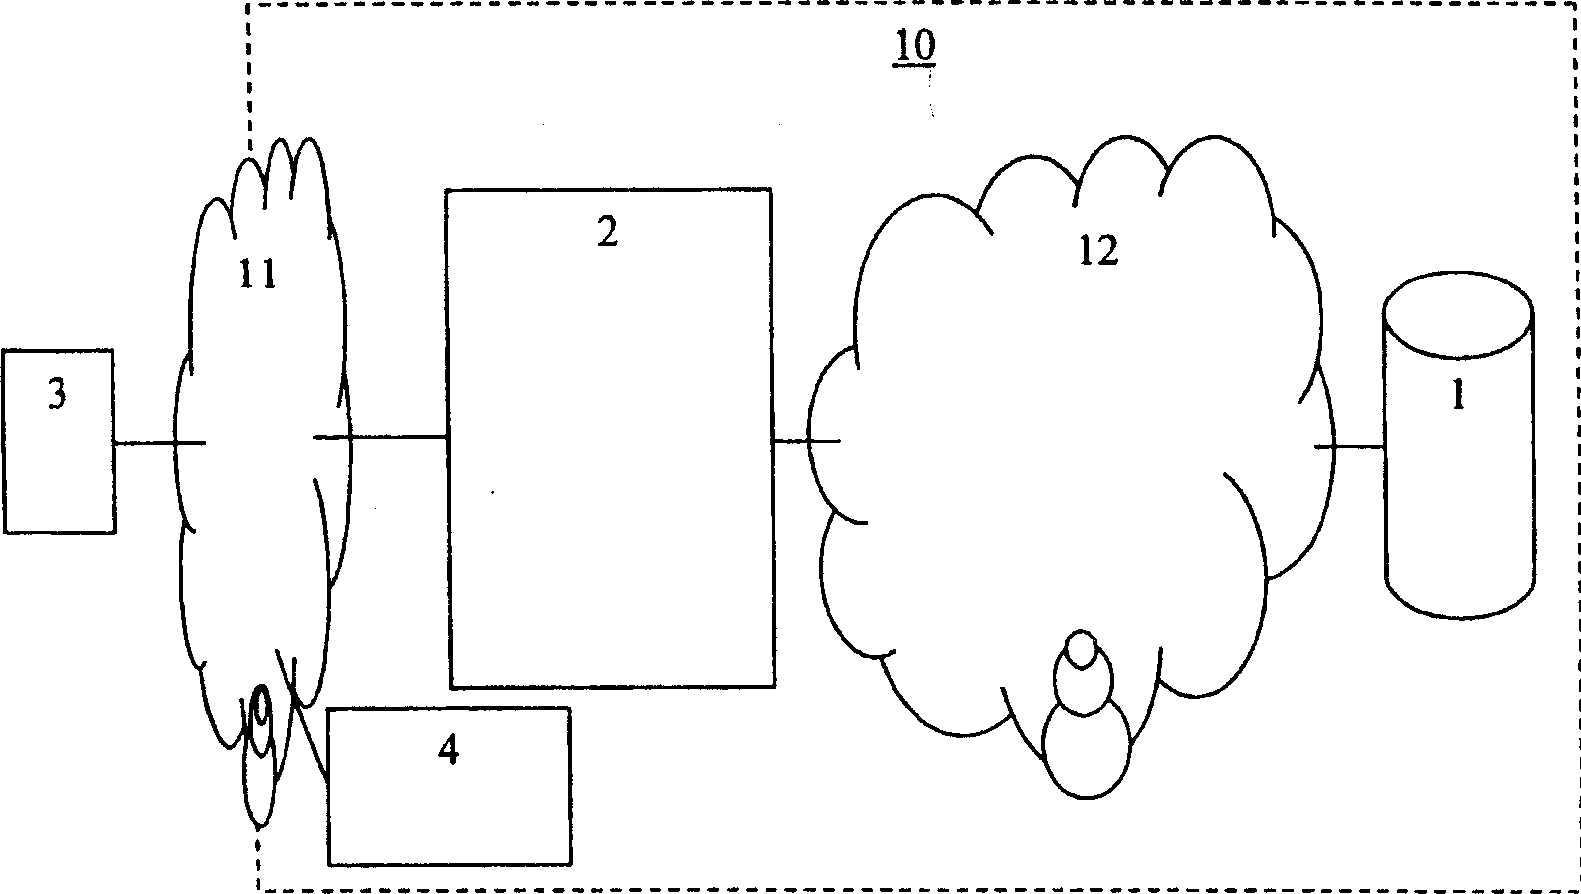 Method for providing an internet-layer address to a client device